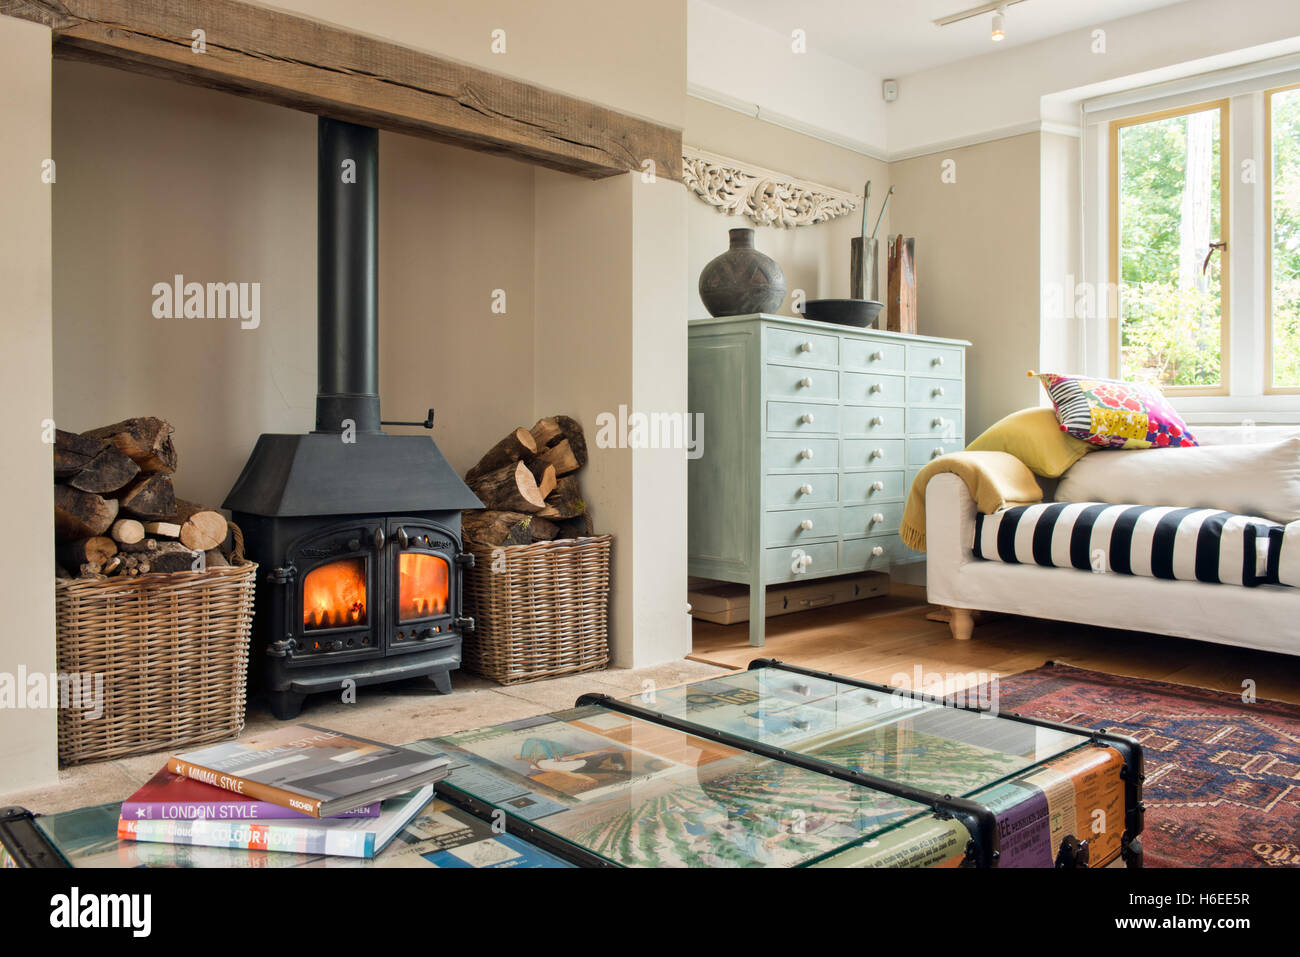 A stylish, colourful living room with a wood burning stove & up cycled furniture Stock Photo